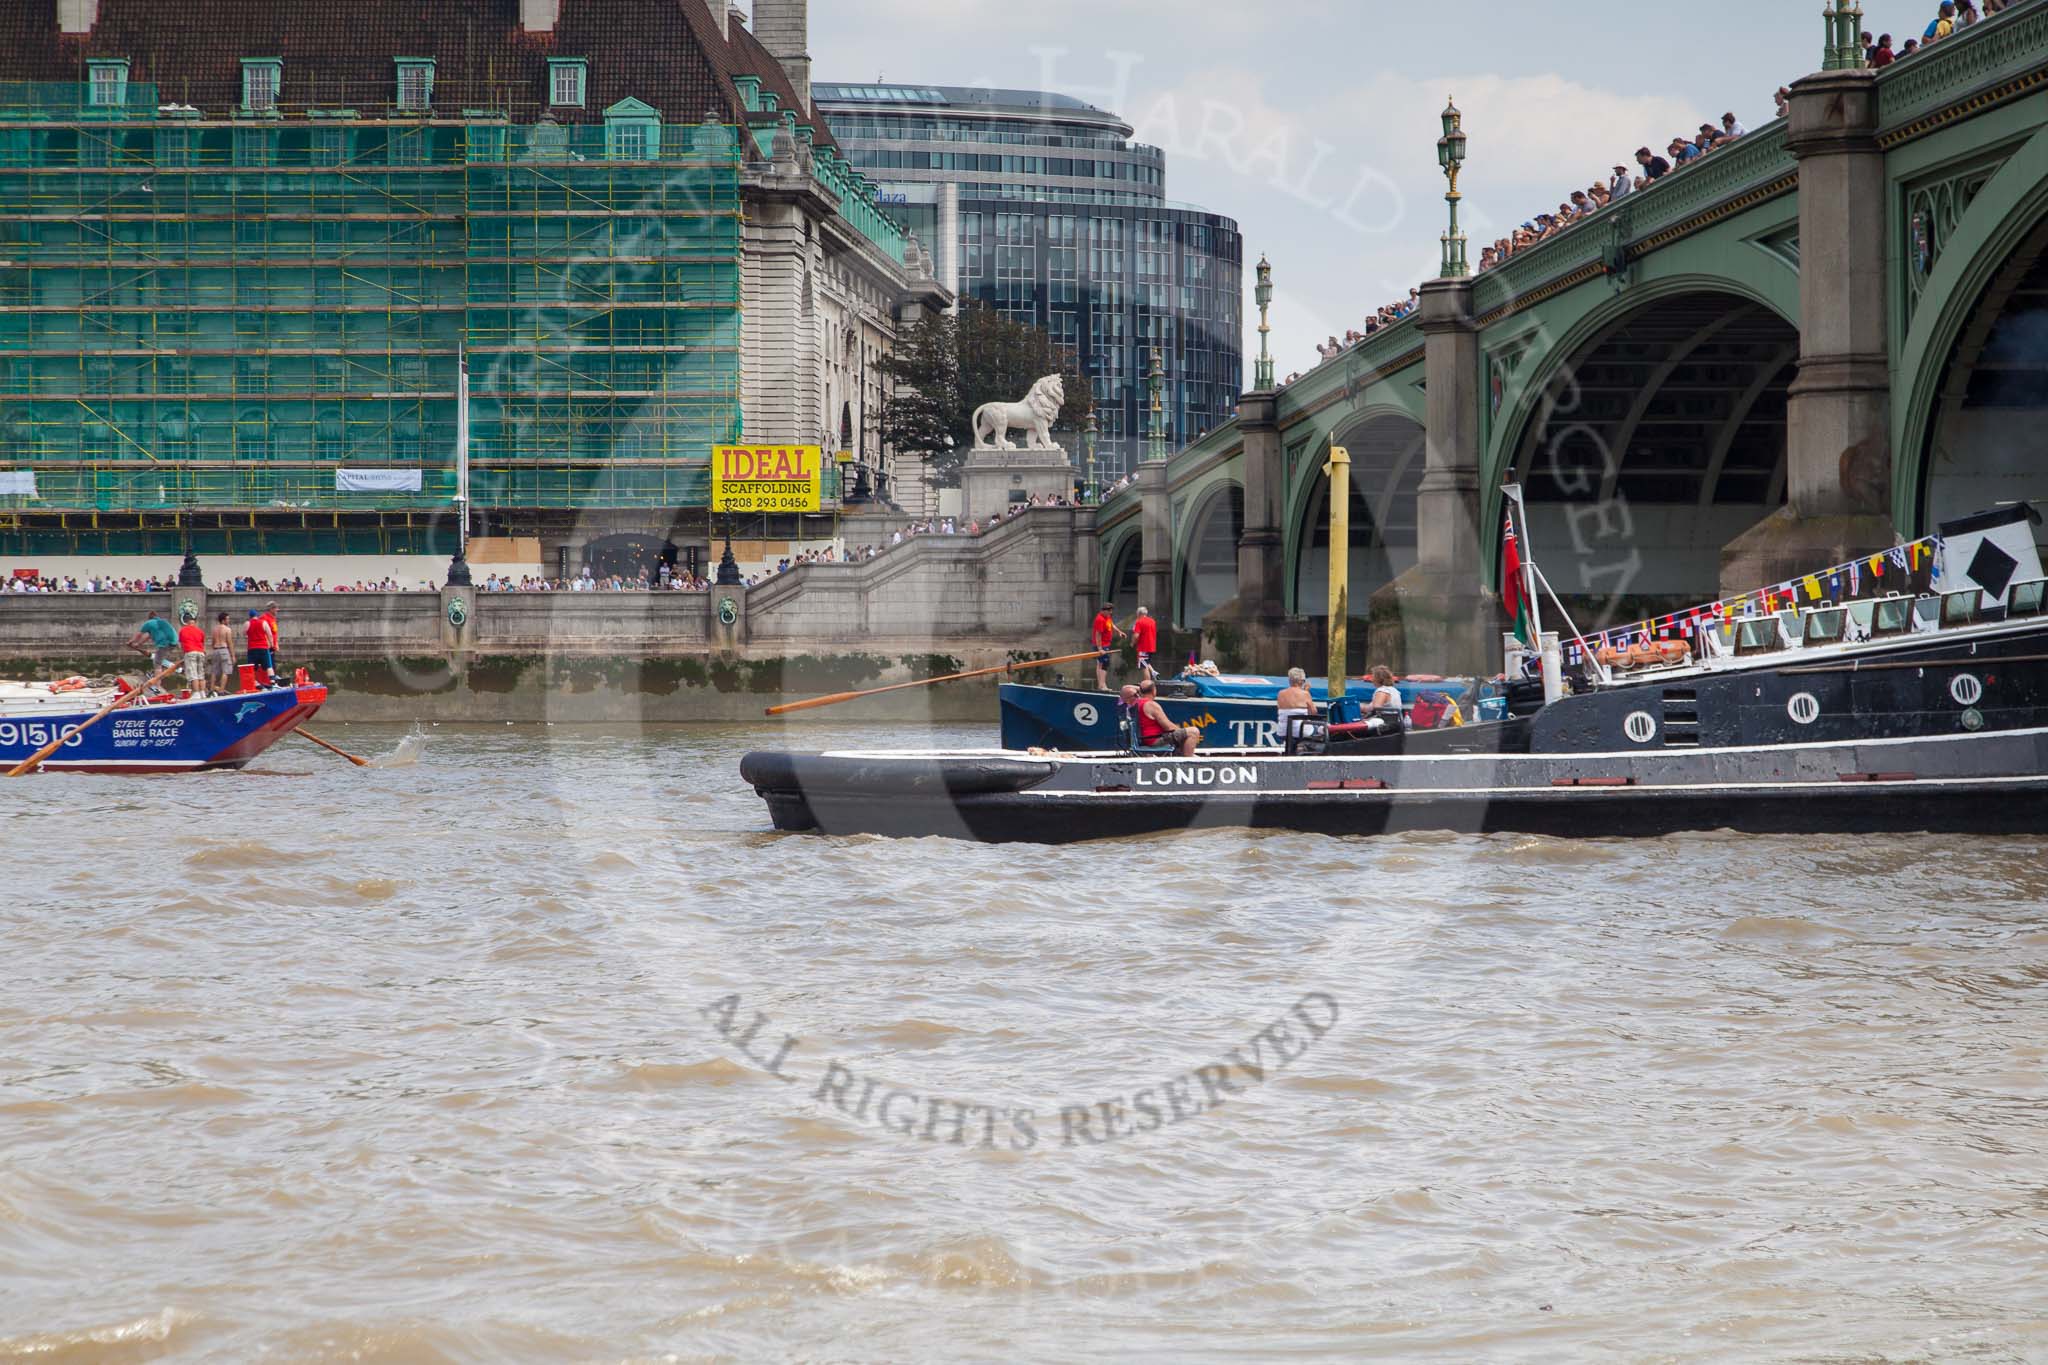 TOW River Thames Barge Driving Race 2013: Barge "Diana", by Trinity Buoy Wharf, crossing the finish of the race at Westminster Bridge, followed by barge "Steve Faldo" by Capital Pleasure Boats..
River Thames between Greenwich and Westminster,
London,

United Kingdom,
on 13 July 2013 at 14:18, image #428